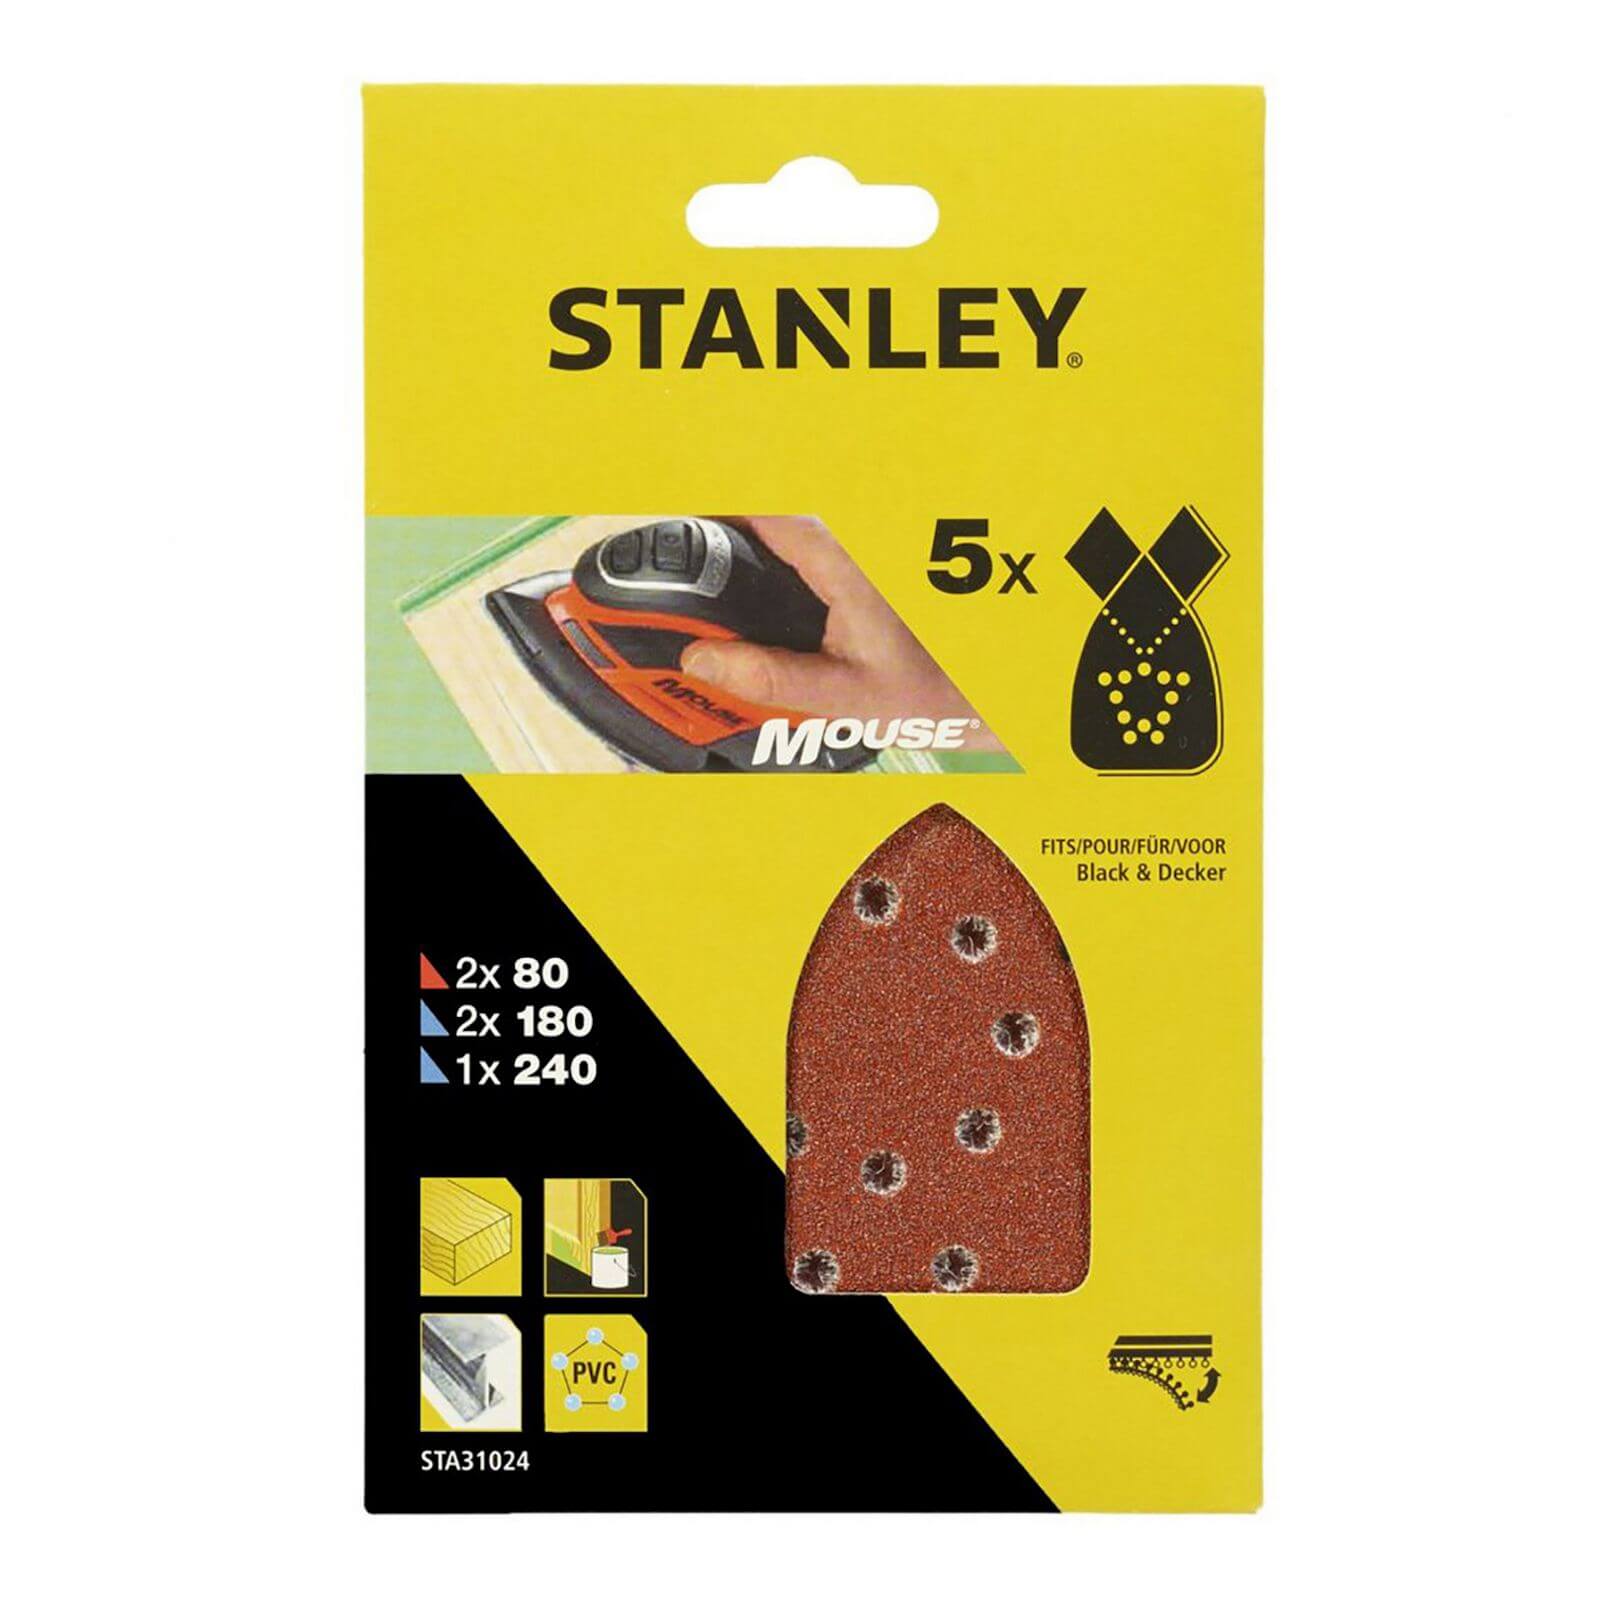 Photo of Stanley Mouse Sanding Sheets Mixed Pack - Sta31024-xj